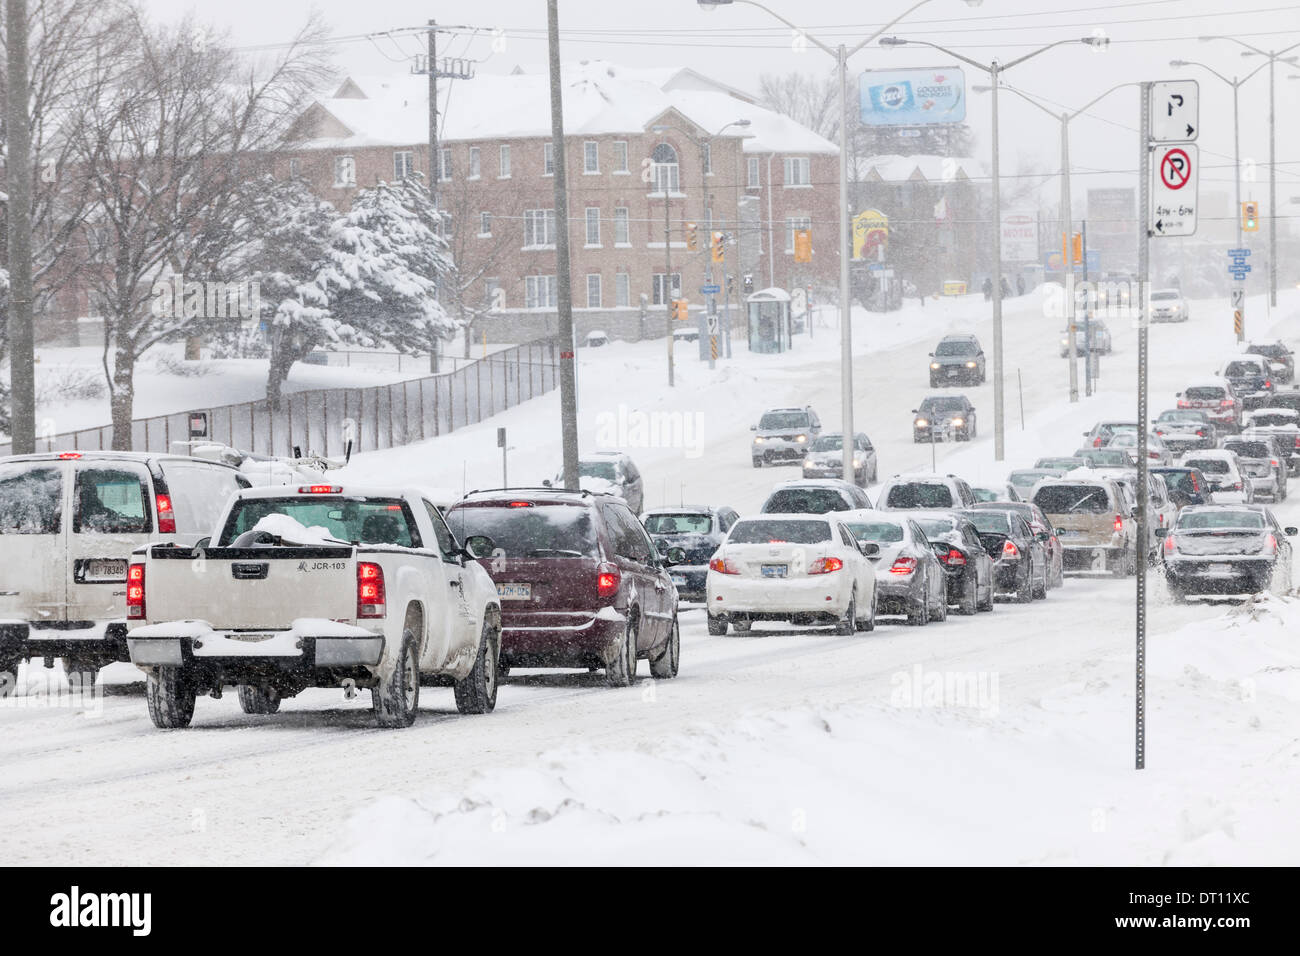 TORONTO, CANADA – FEBRUARY 5, 2014: Traffic on Kingston Road during winter snowstorm on Wednesday, February 5, 2014 in Toronto. Drivers cope with hazardous conditions during the 2014 polar vortex. Credit:  Elena Elisseeva/Alamy Live News Stock Photo